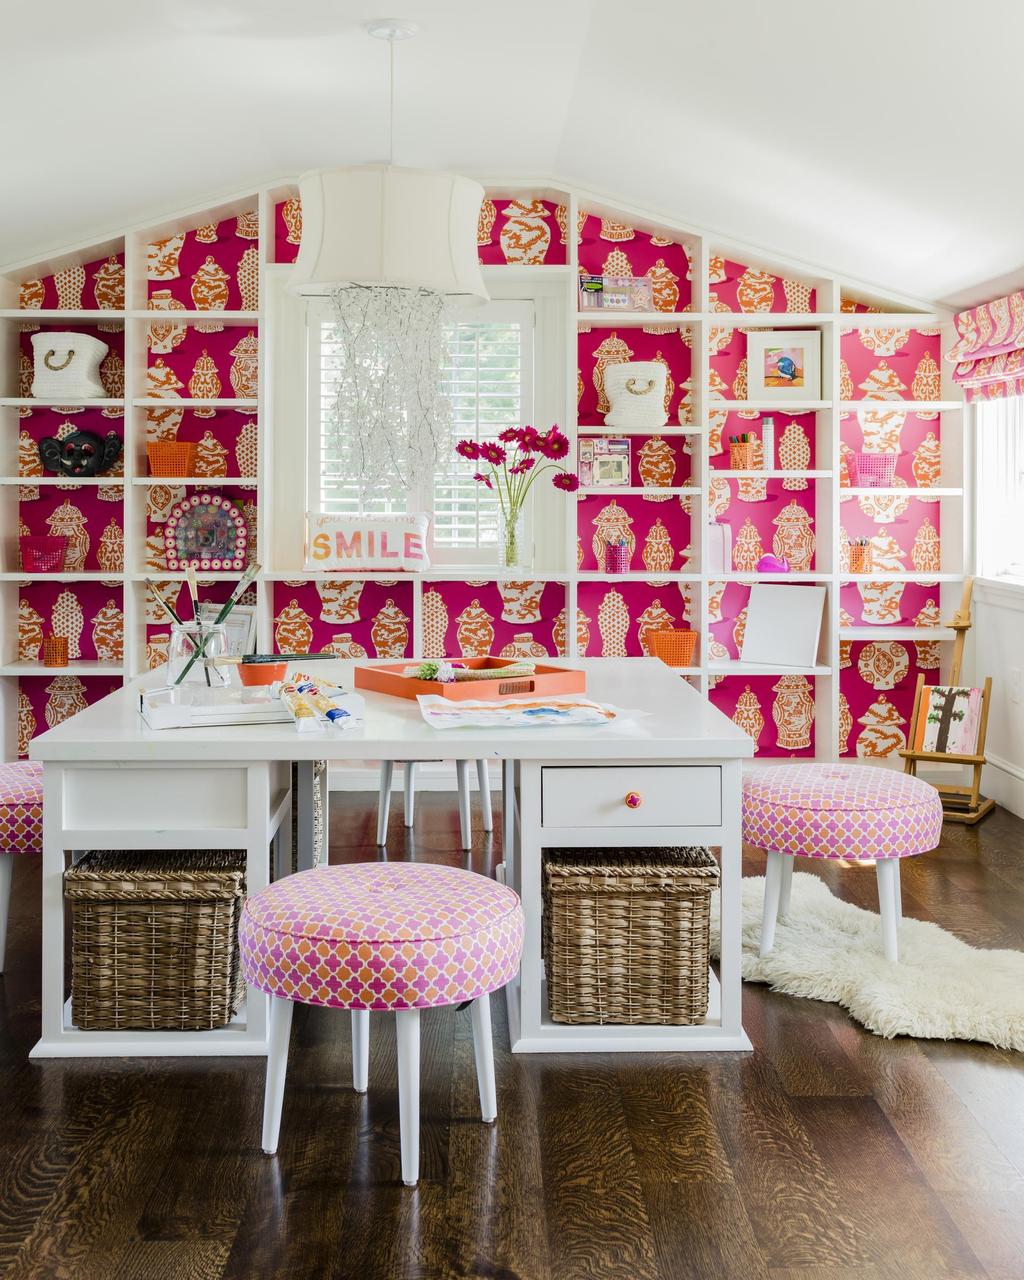 Throughout the house, the decor incorporates art from Colombia, including vibrant oversize